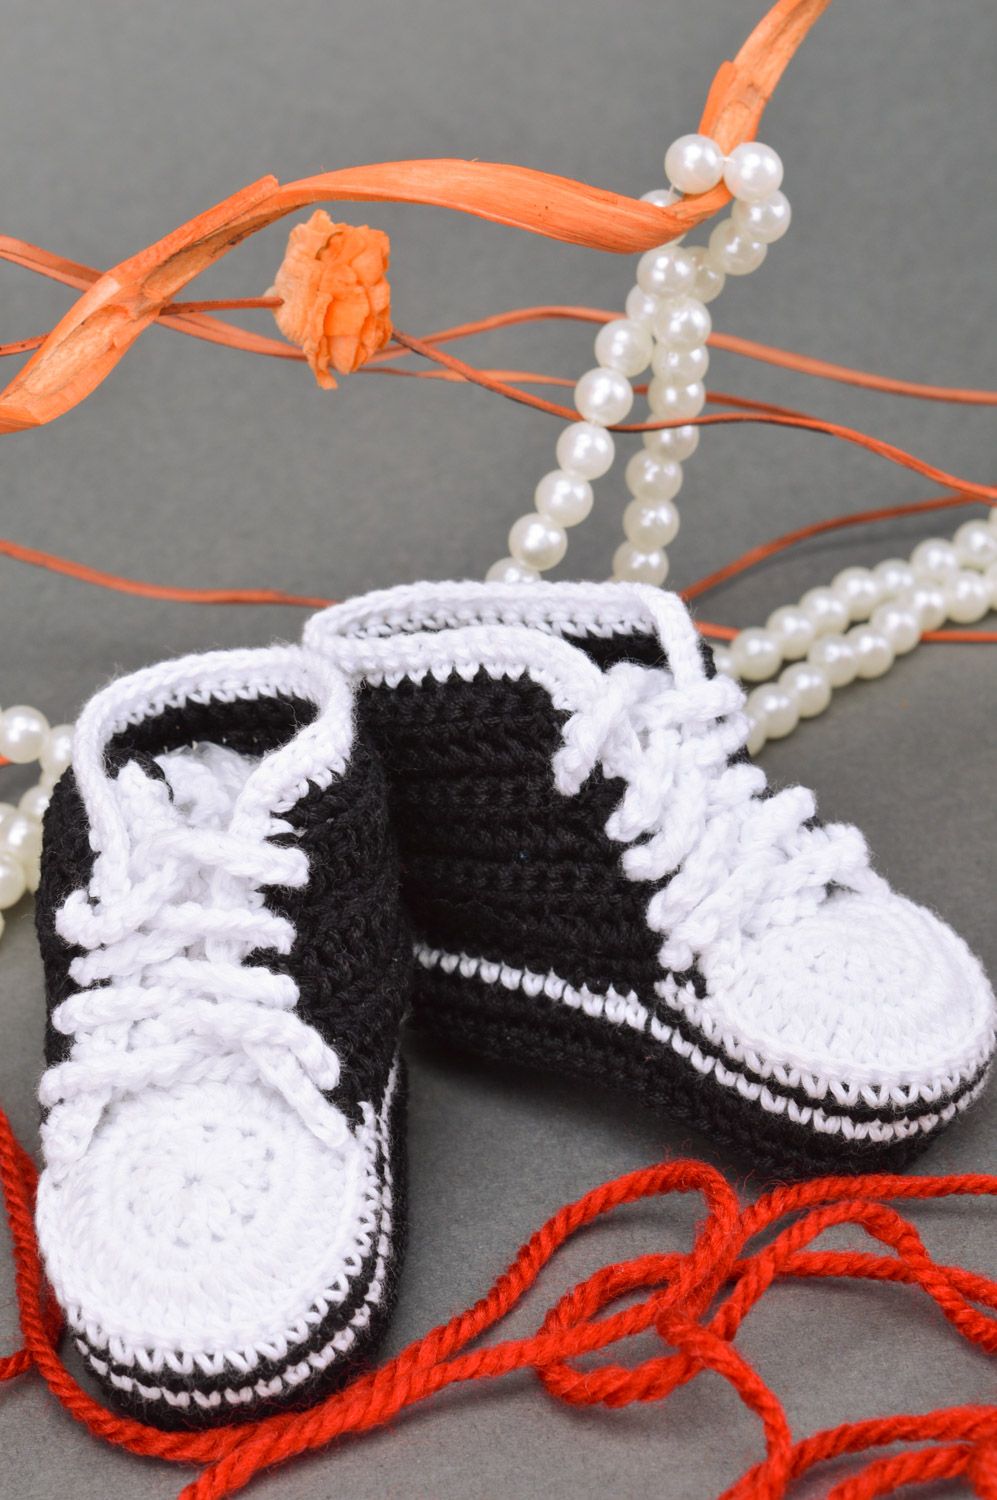 Handmade crochet baby booties in black and white colors with shoelaces photo 1